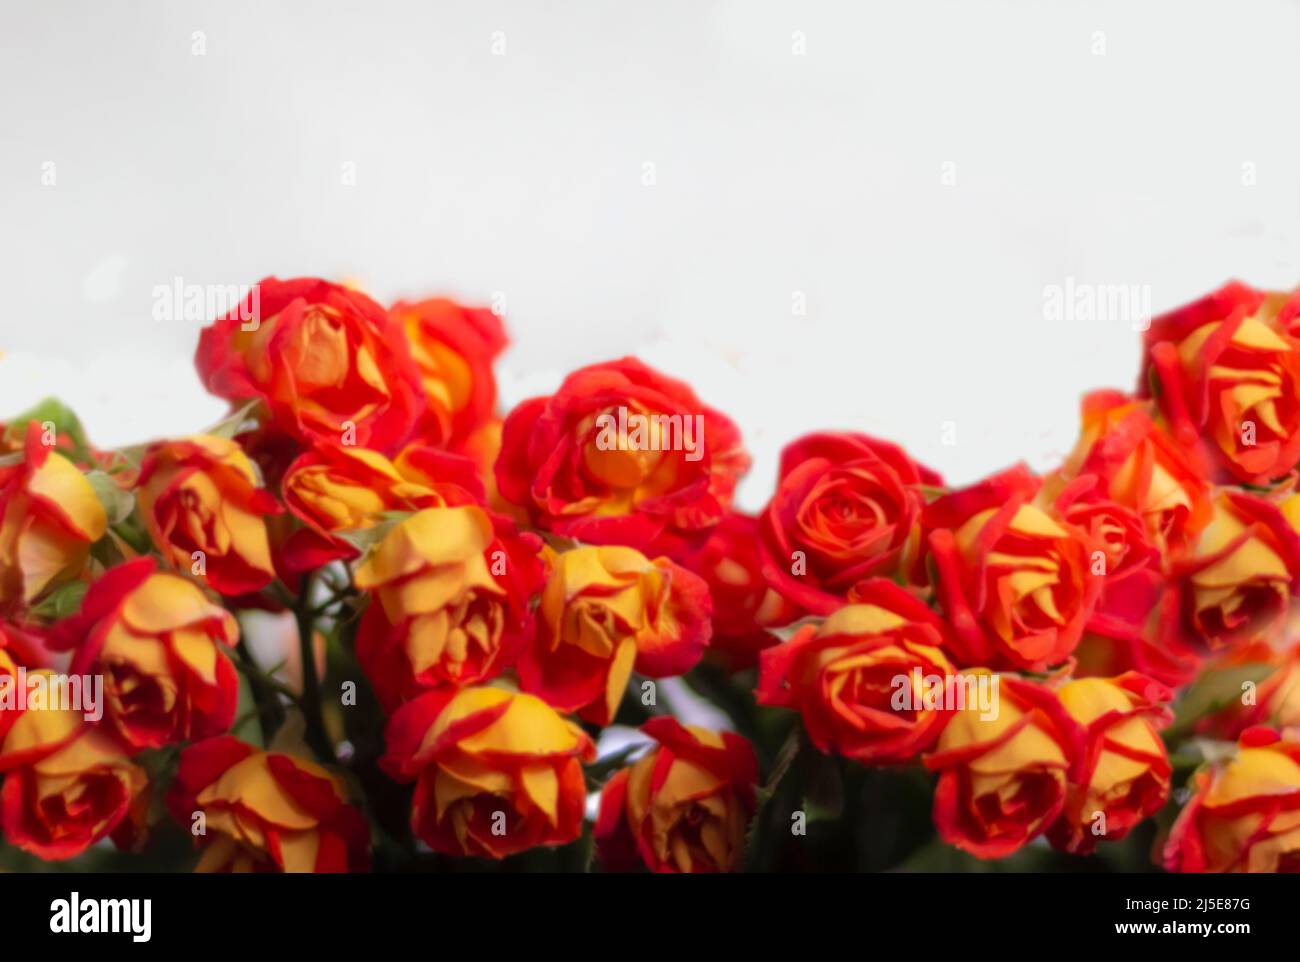 A Large Lush Bouquet of Red Garden Roses and Buds in Black Wrapping Paper,  a Stylish Stock Image - Image of background, design: 147364341